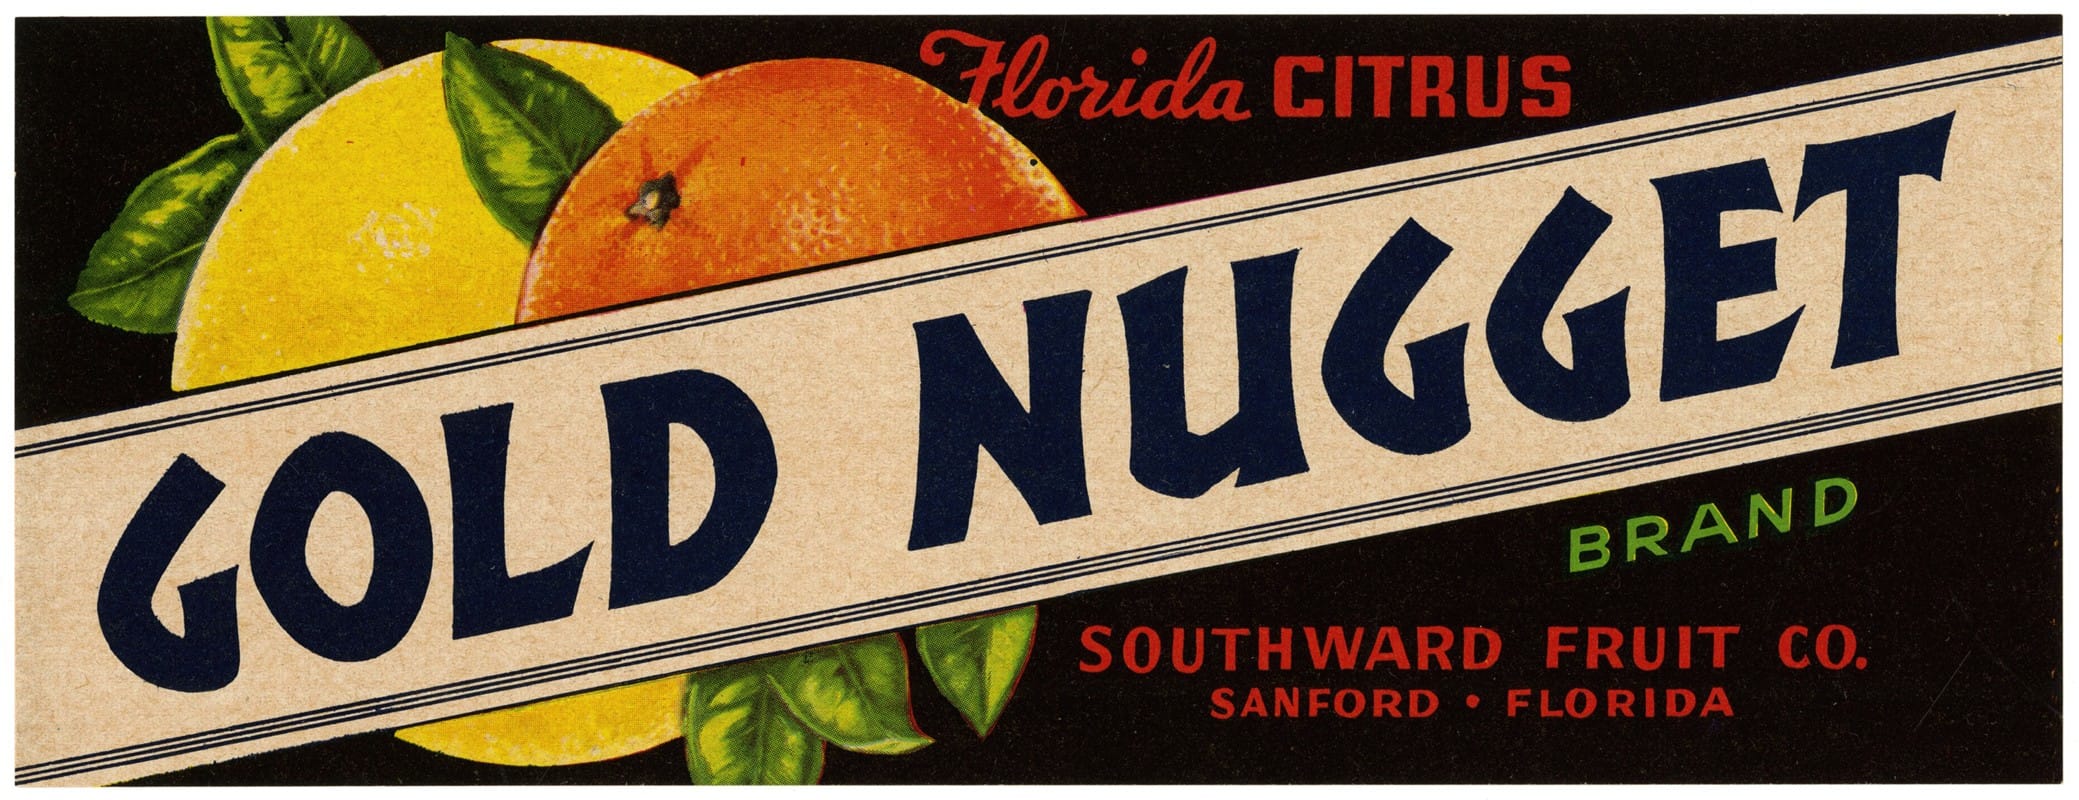 Anonymous - Gold Nugget Brand Citrus Label